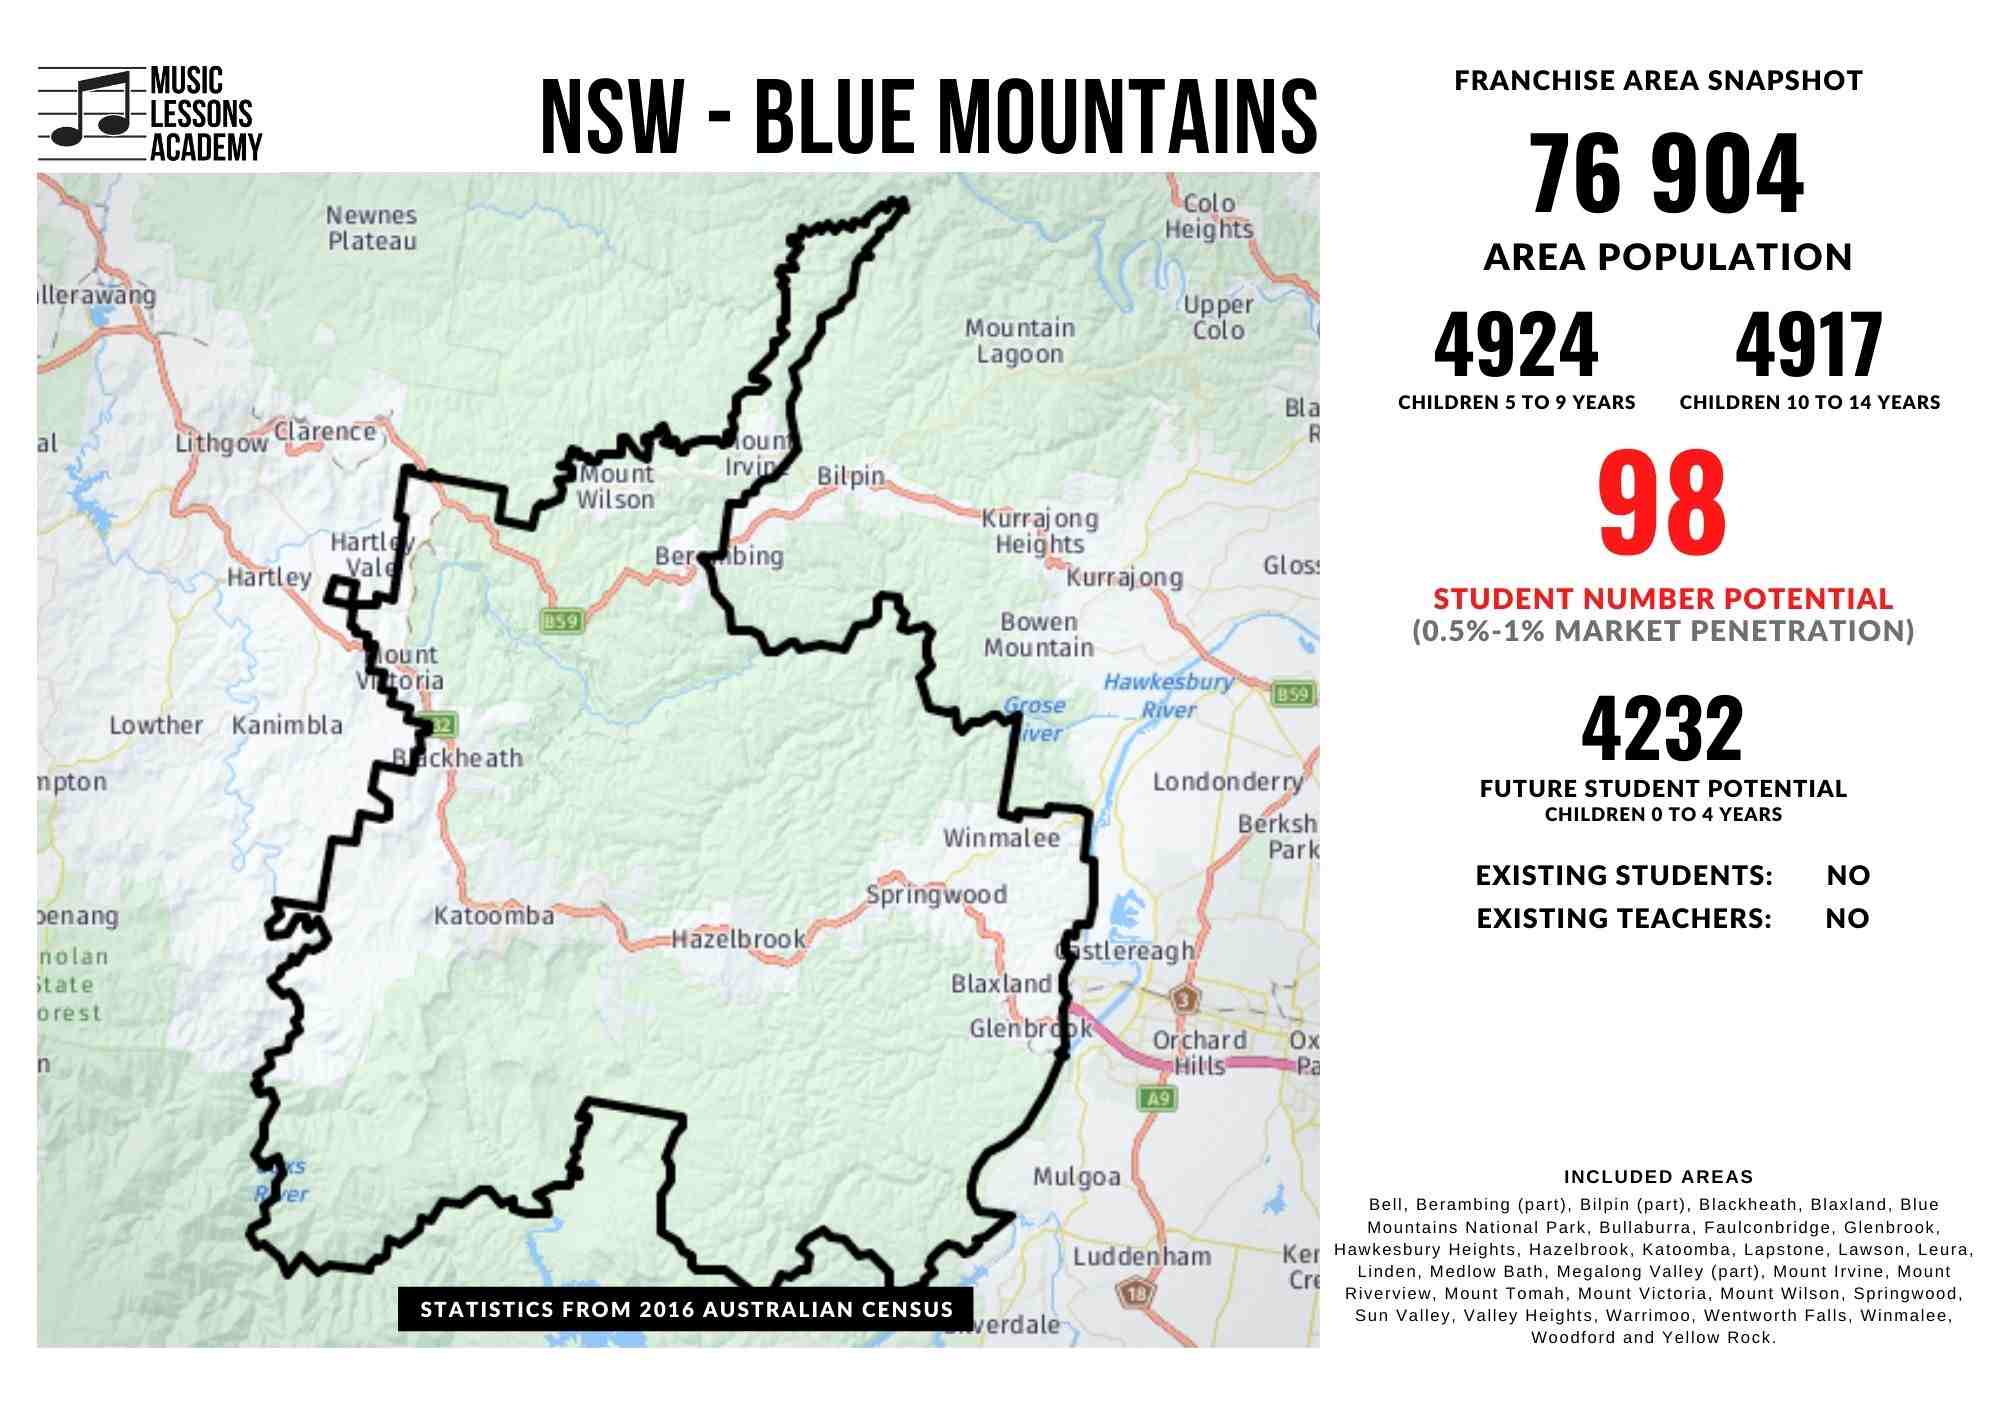 NSW Blue Mountains Franchise for sale